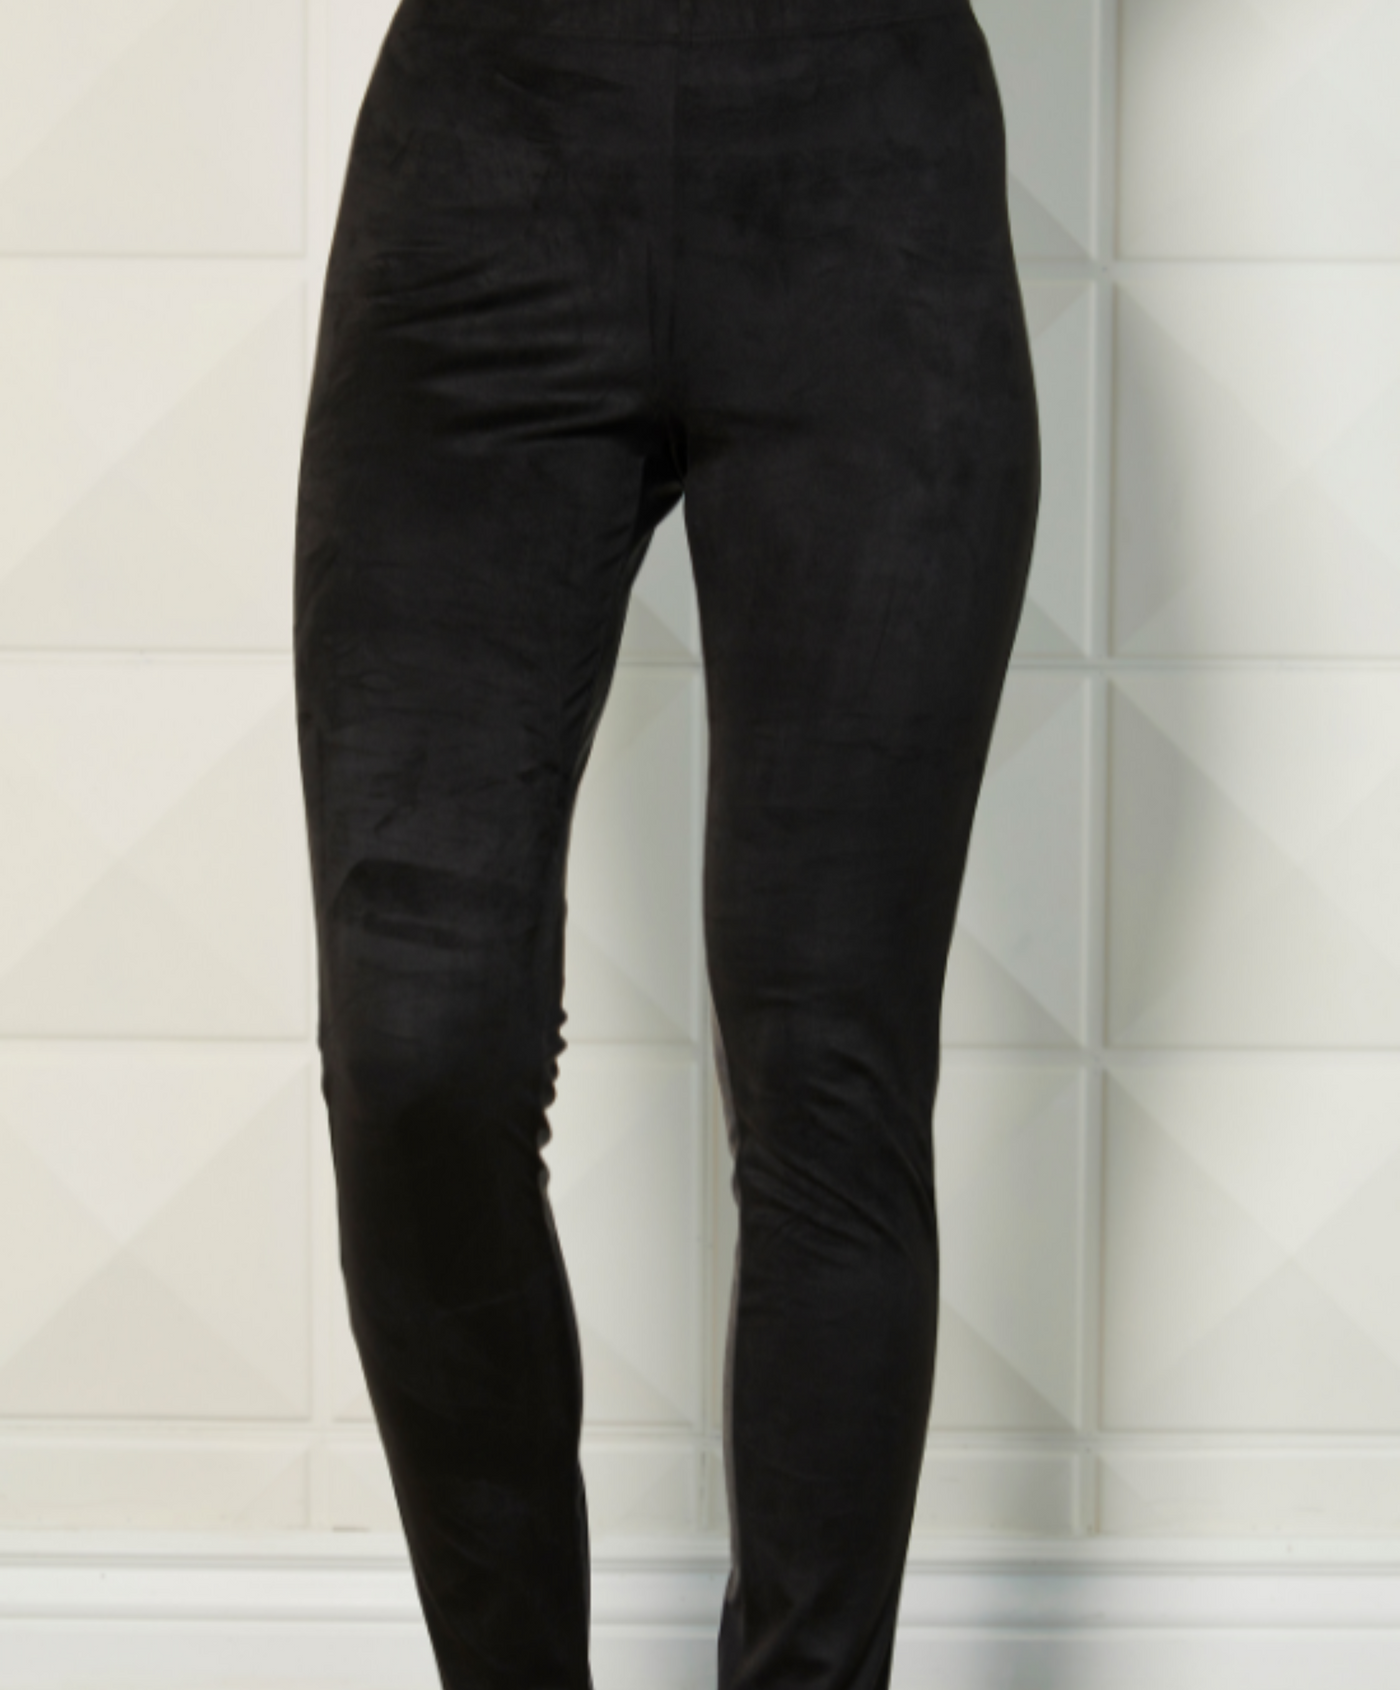 Vegan Leather/Suede Pant